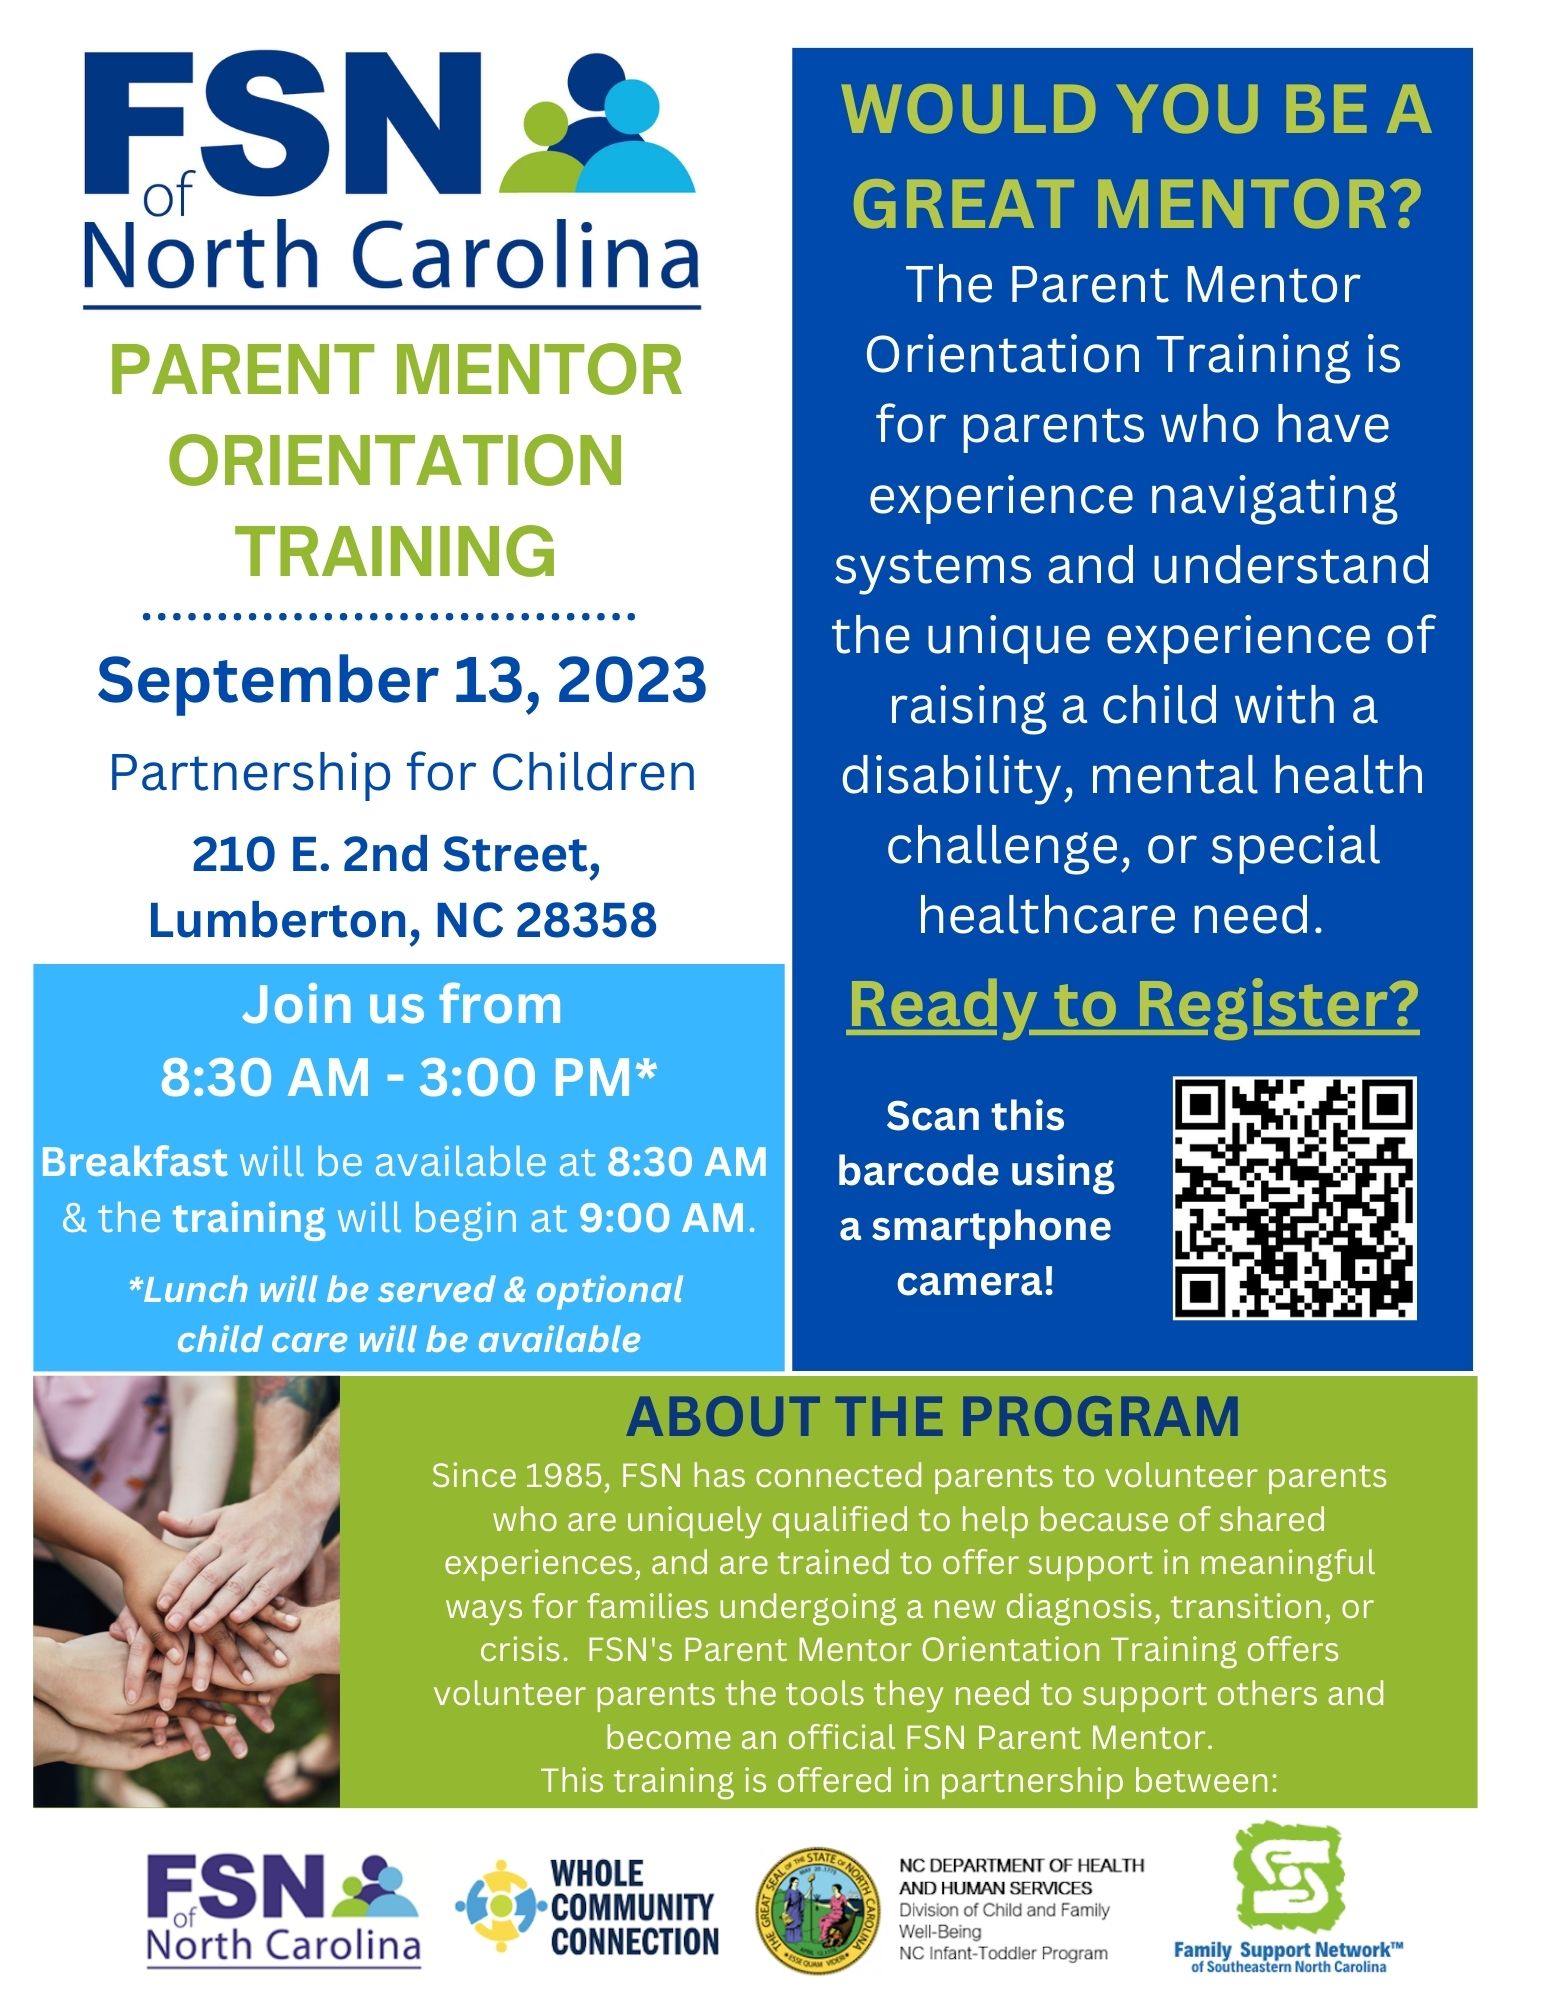 FSN of North Carolina Parent Mentor Orientation Training on September 13, 2023 from 8:30 a.m. to 3:00 p.m. at 210 E. 2nd Street, Lumberton, NC 28358